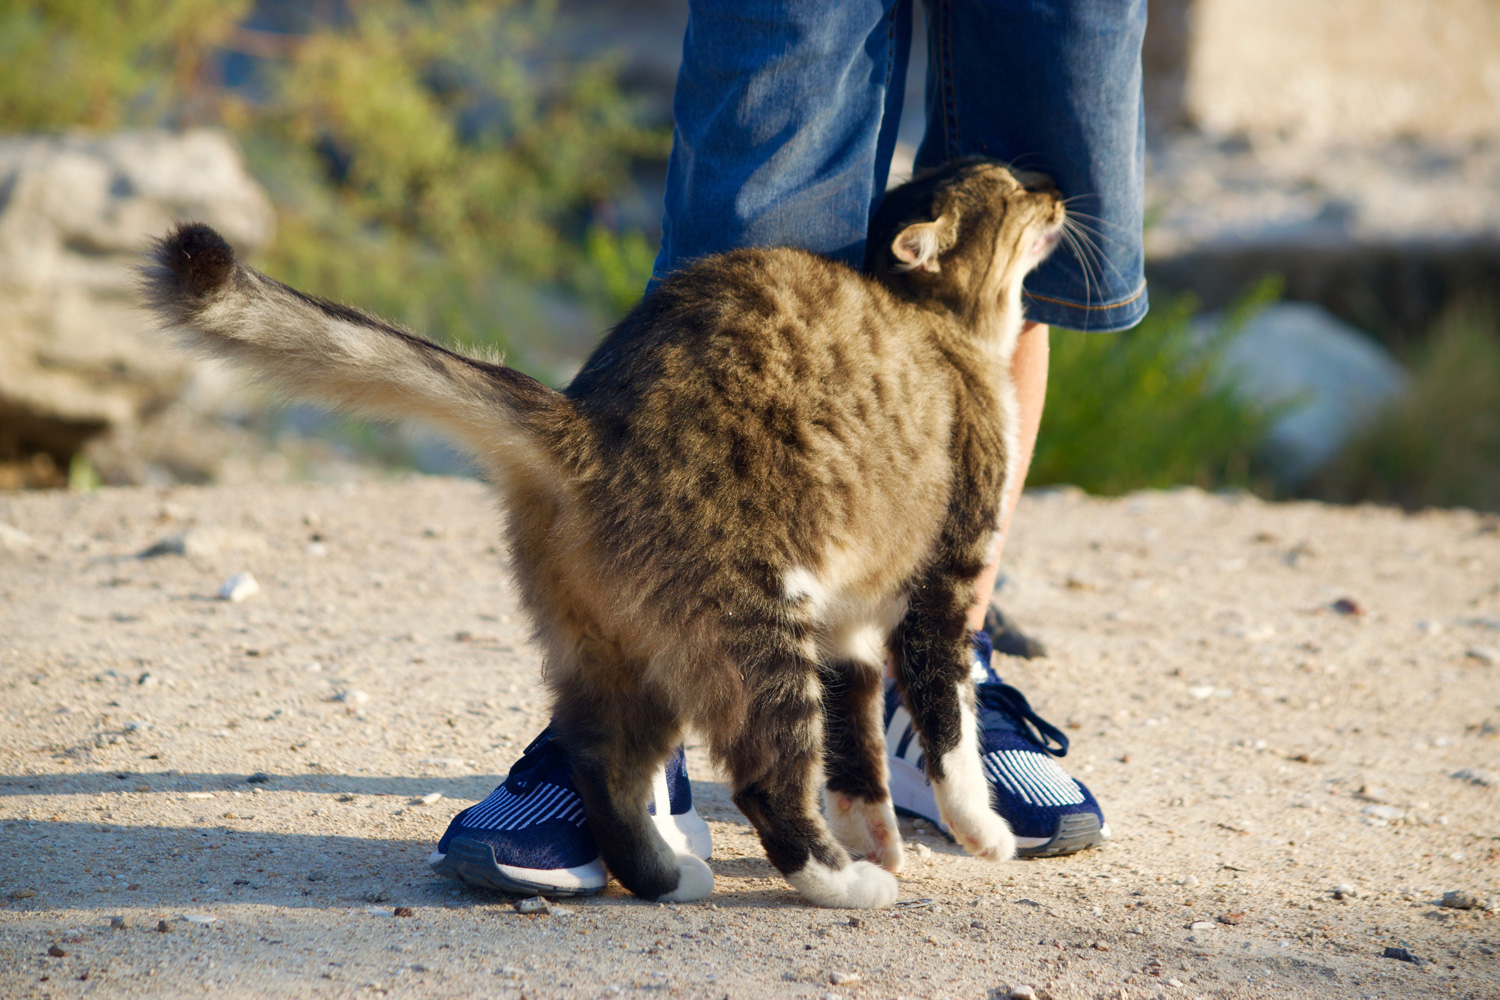 A small cat rubbing its owner's leg